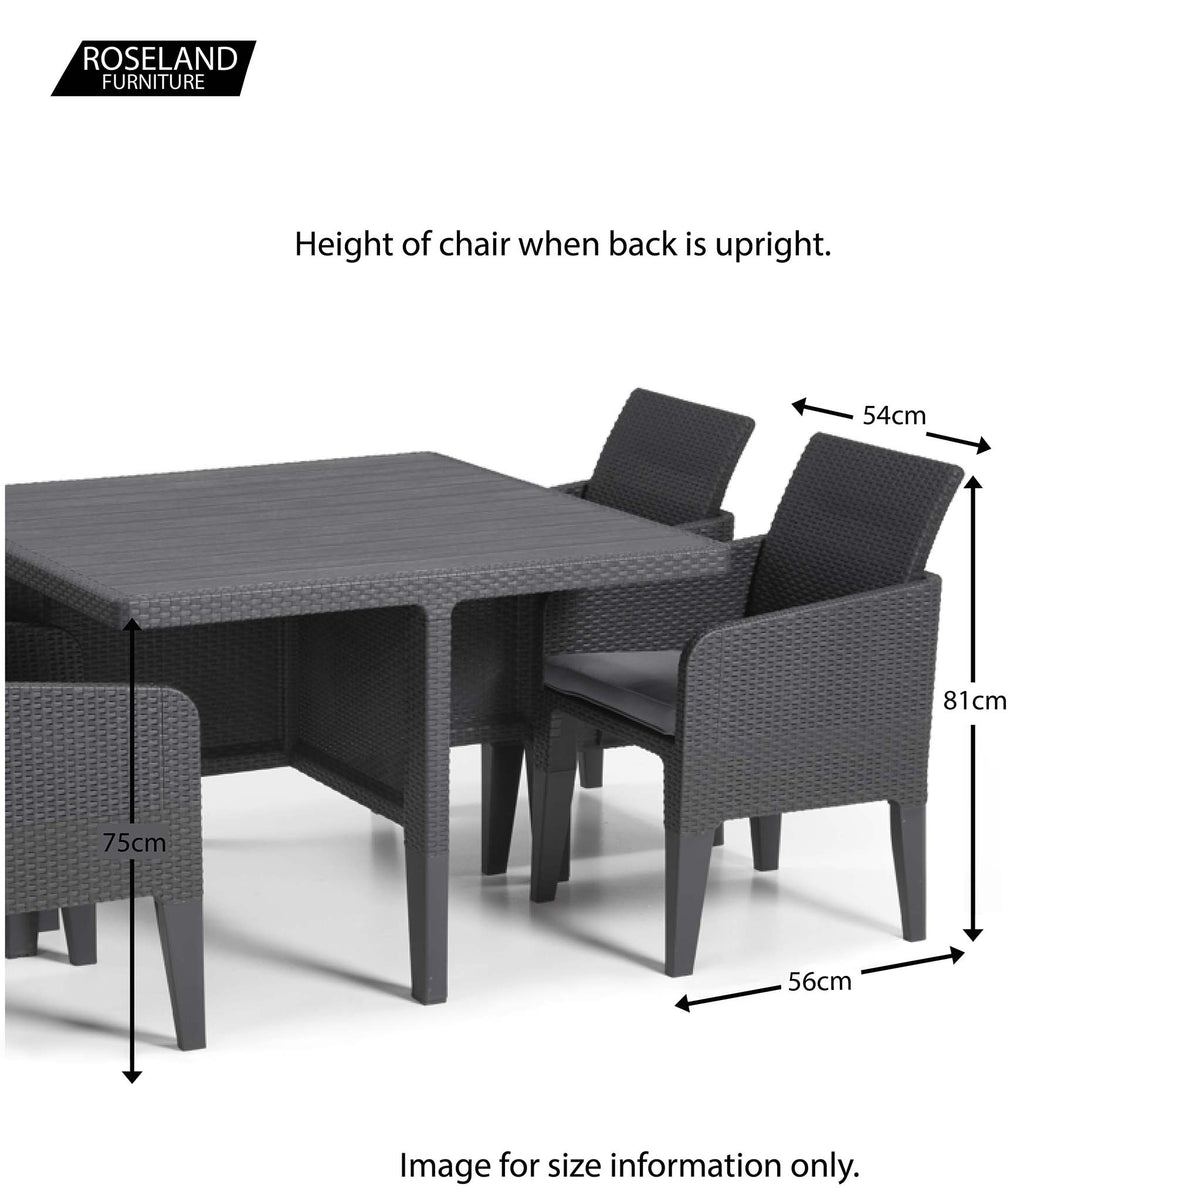 Keter Dine Out 4-8 Seater Dining Set - Size Guide of chairs when the backs are upright